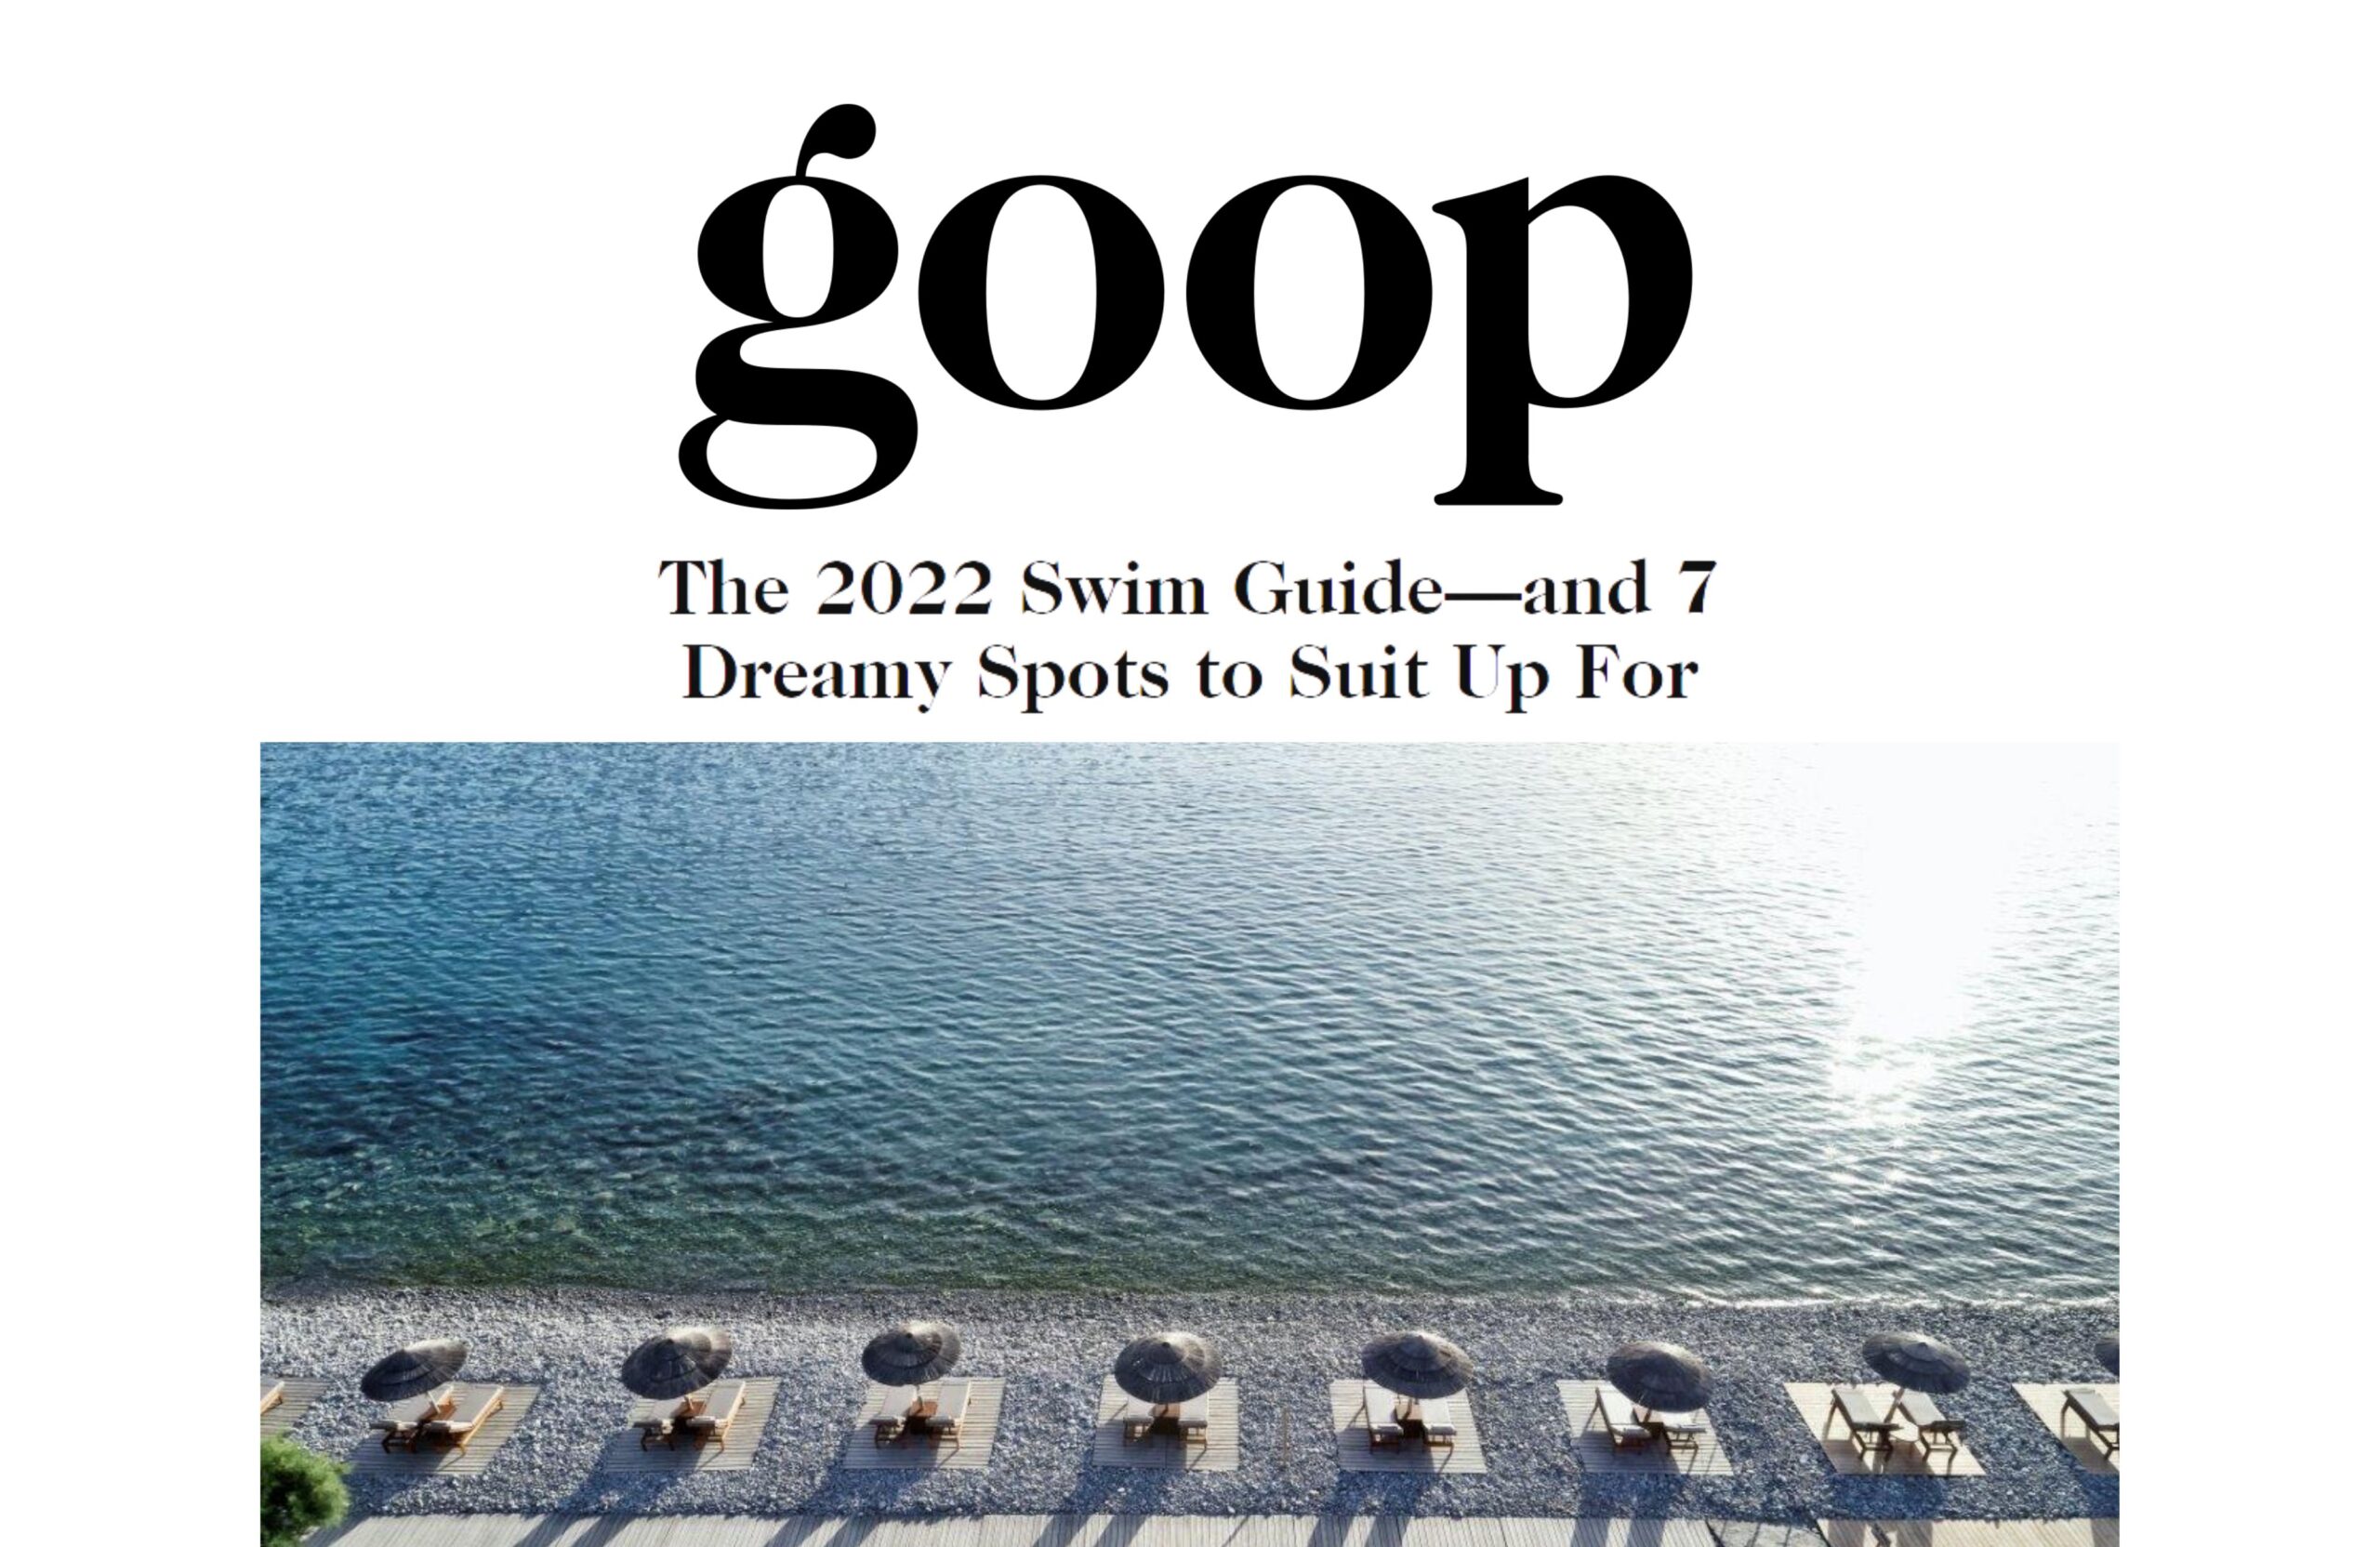 The 2022 Swim Guide And 7 Dreamy Spots To Suit Up For, In Goop